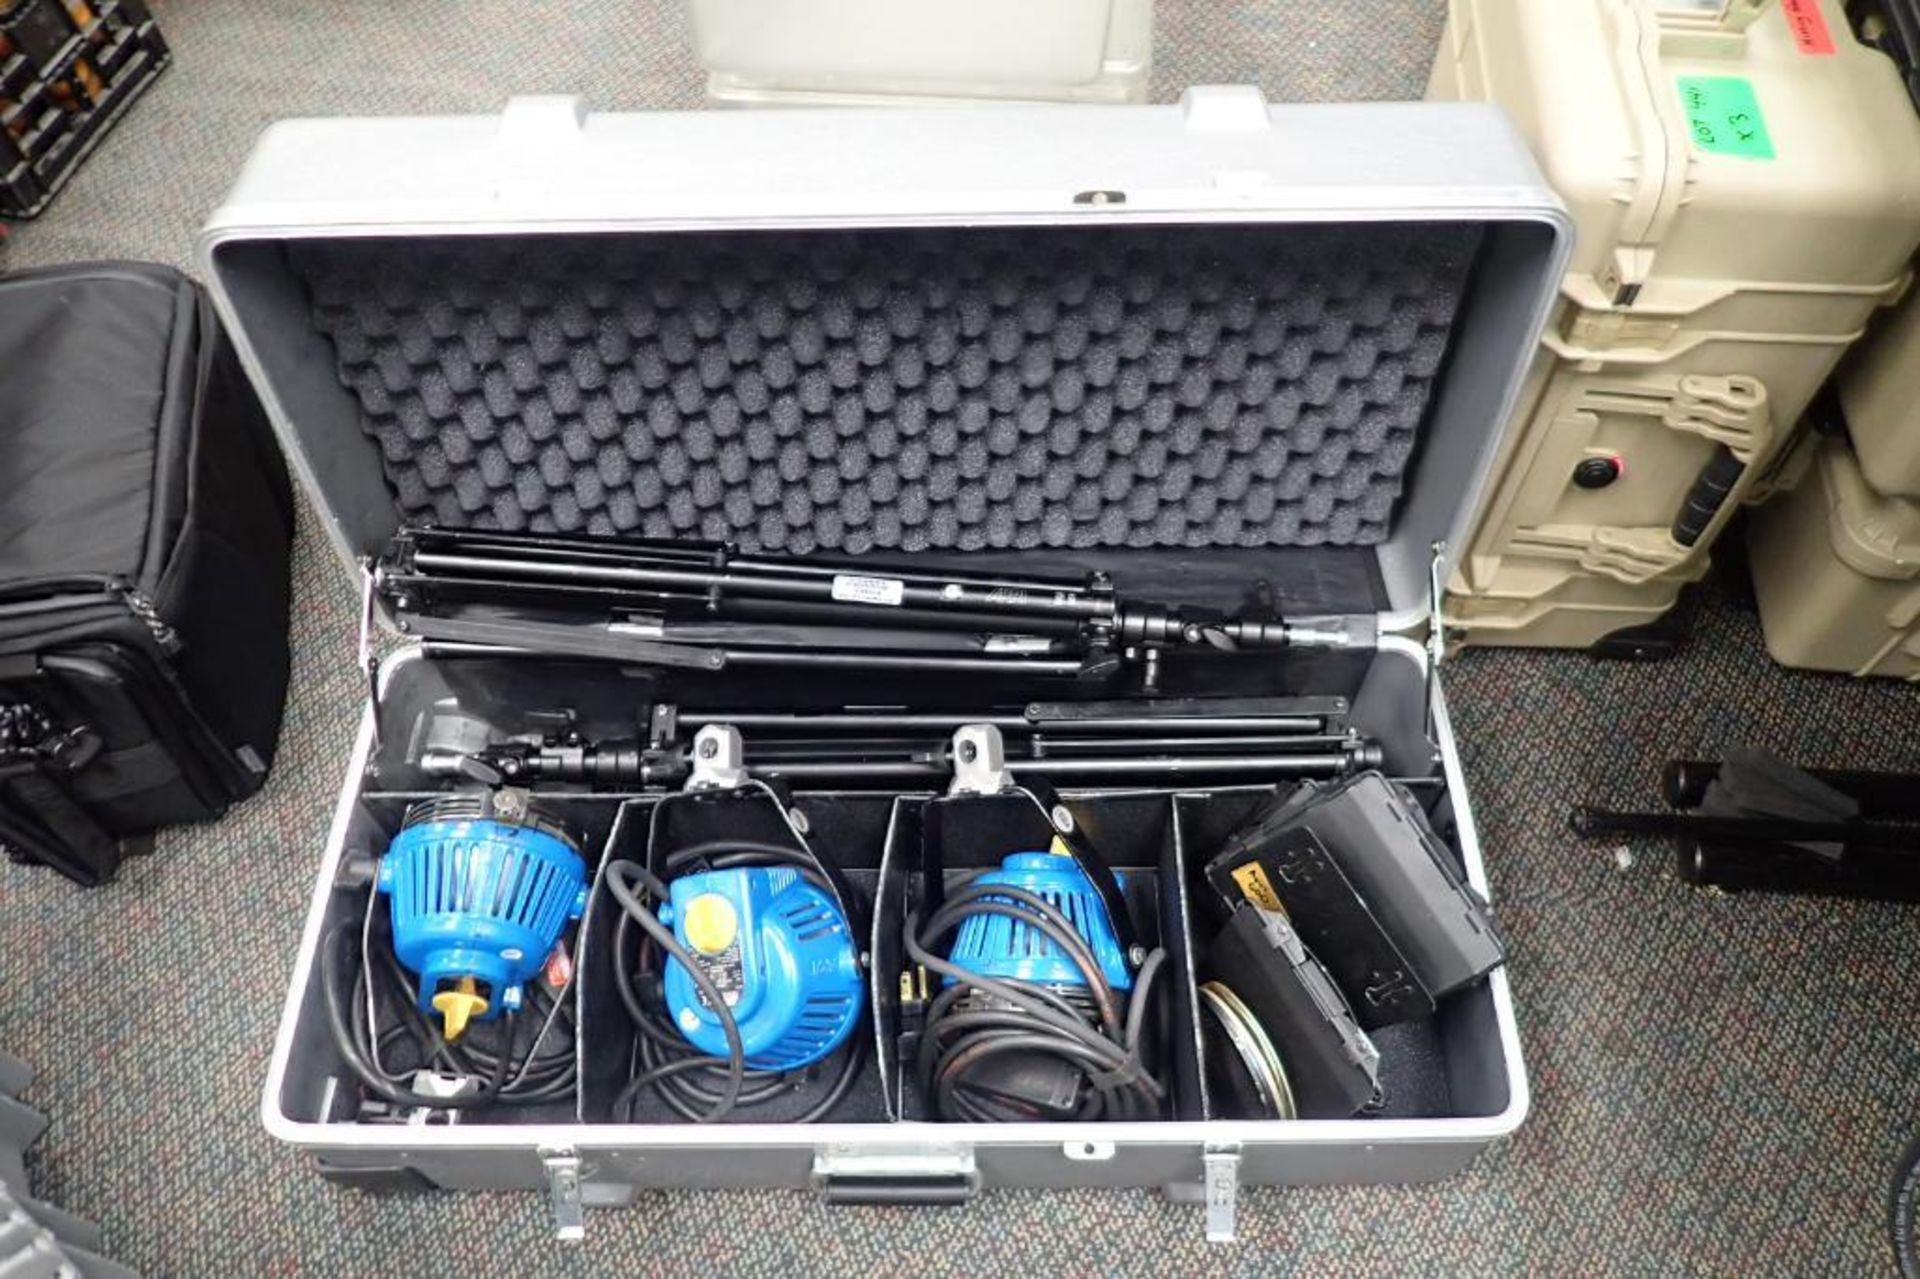 Arri photography and cinema lights, Models 150, 300, 650, with hard case - Image 8 of 13